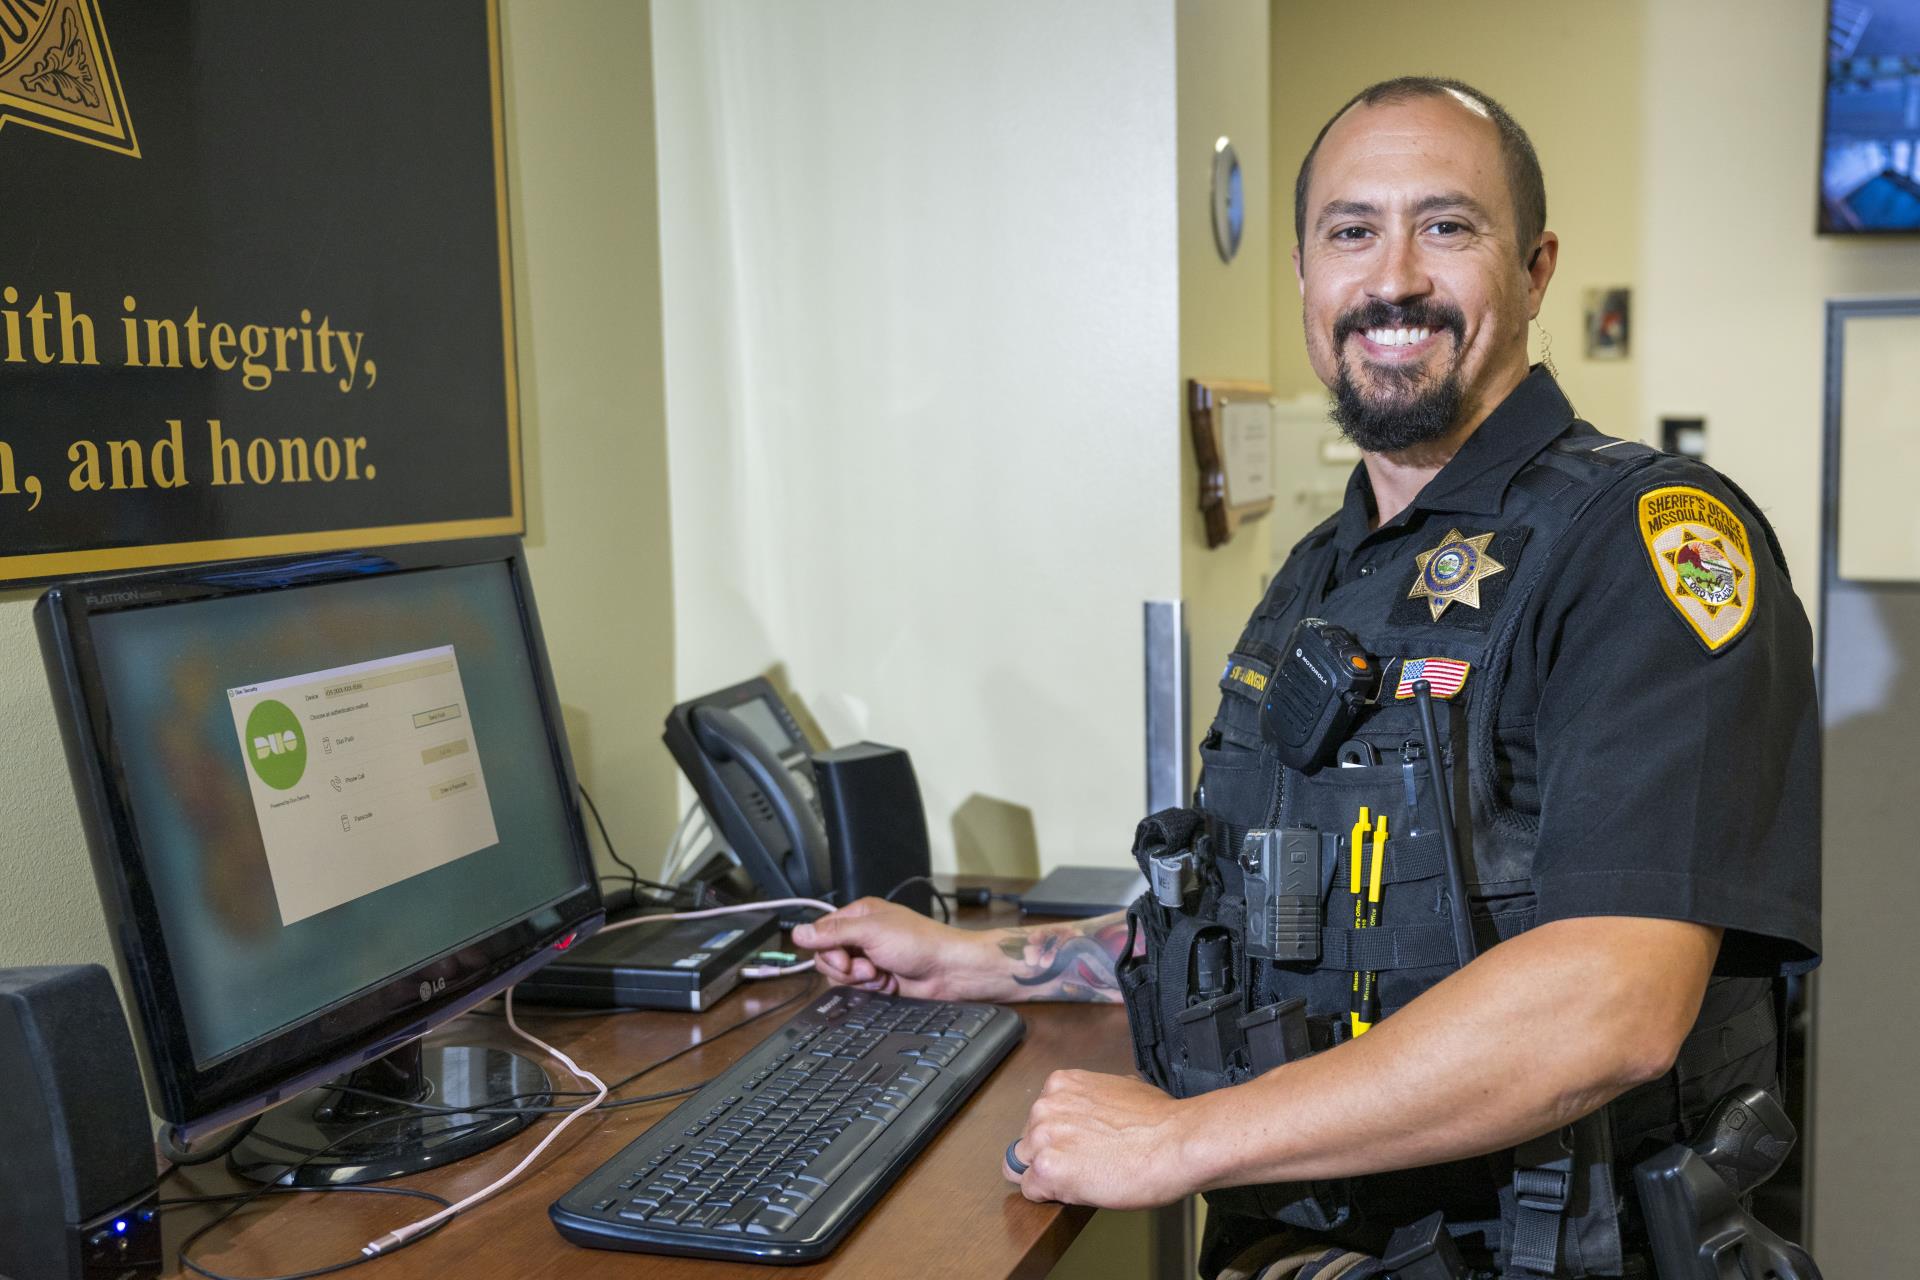 Deputy seated at a computer